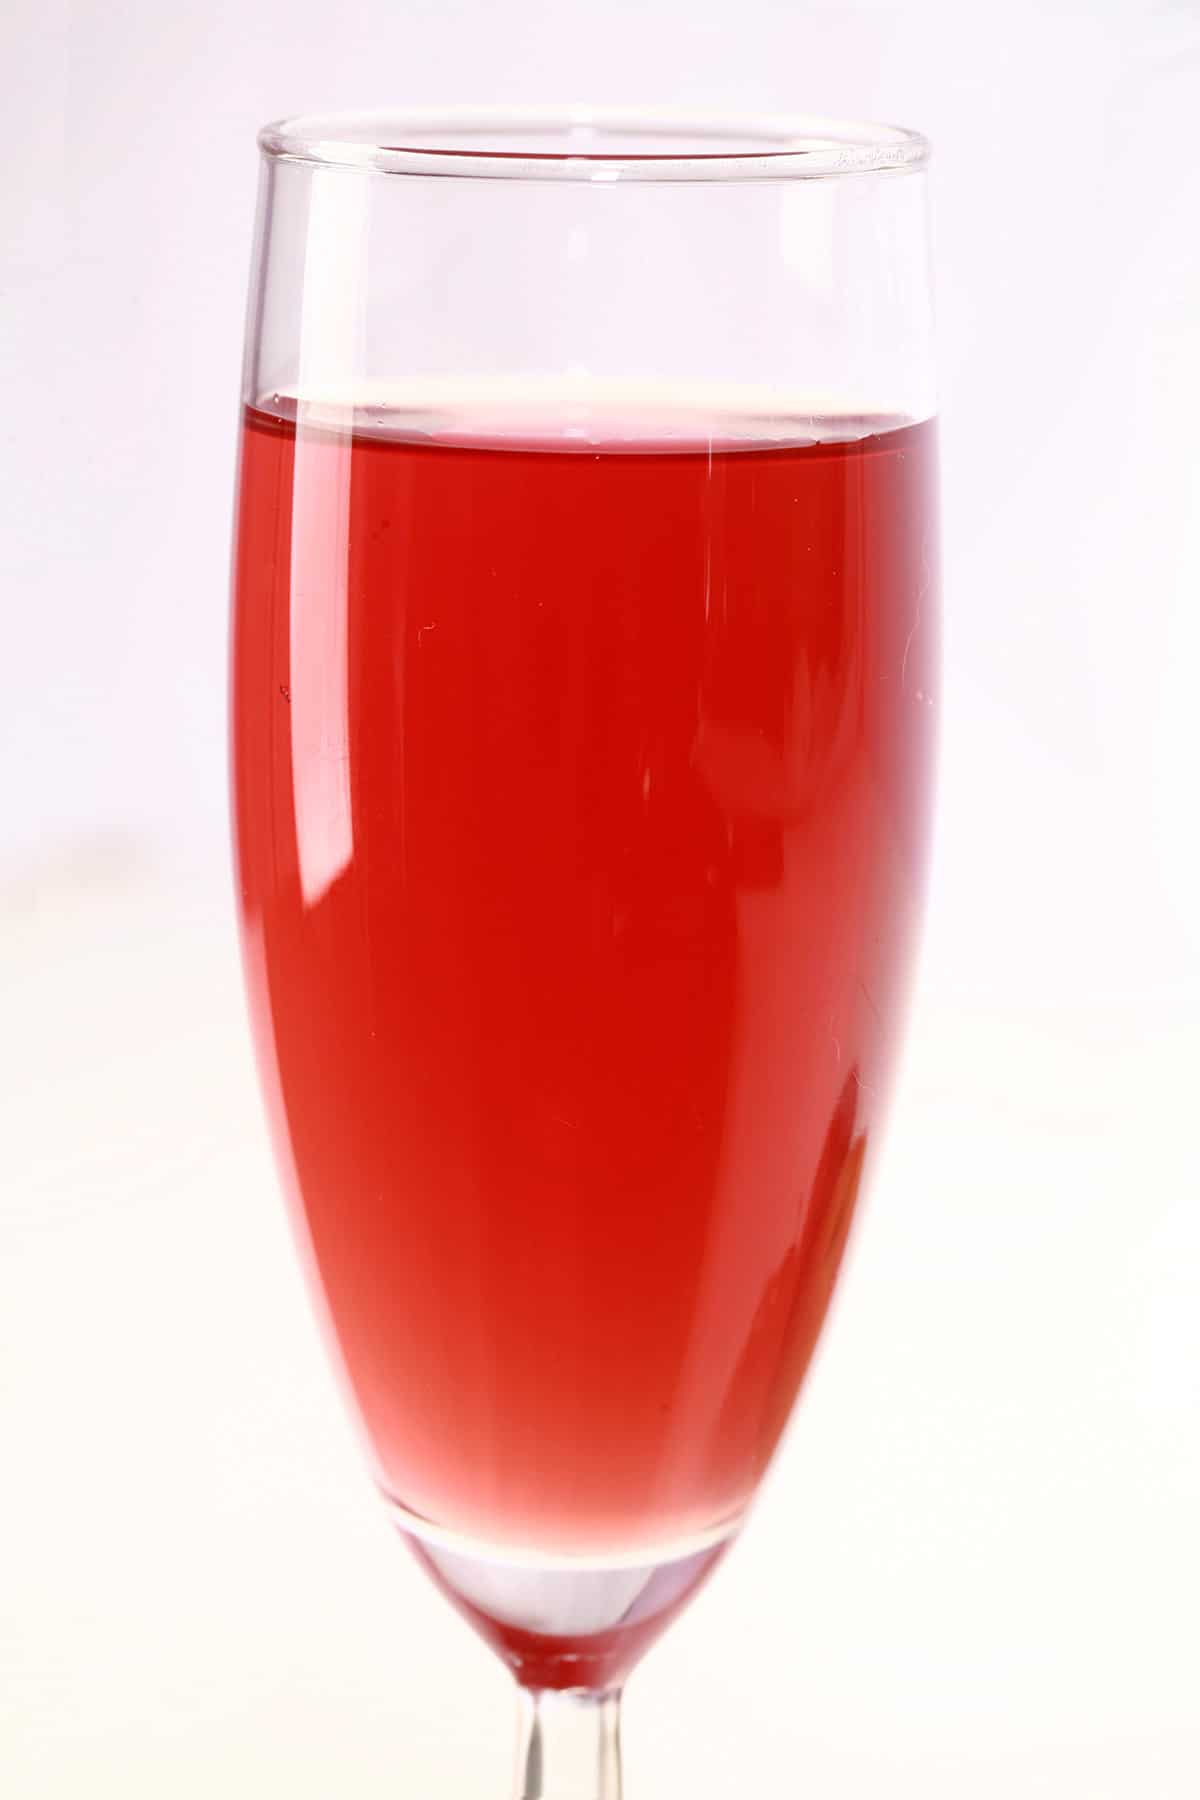 A tall glass of fruit punch-coloured stone fruit wine, next to a peach, a plum, and a few cherries.